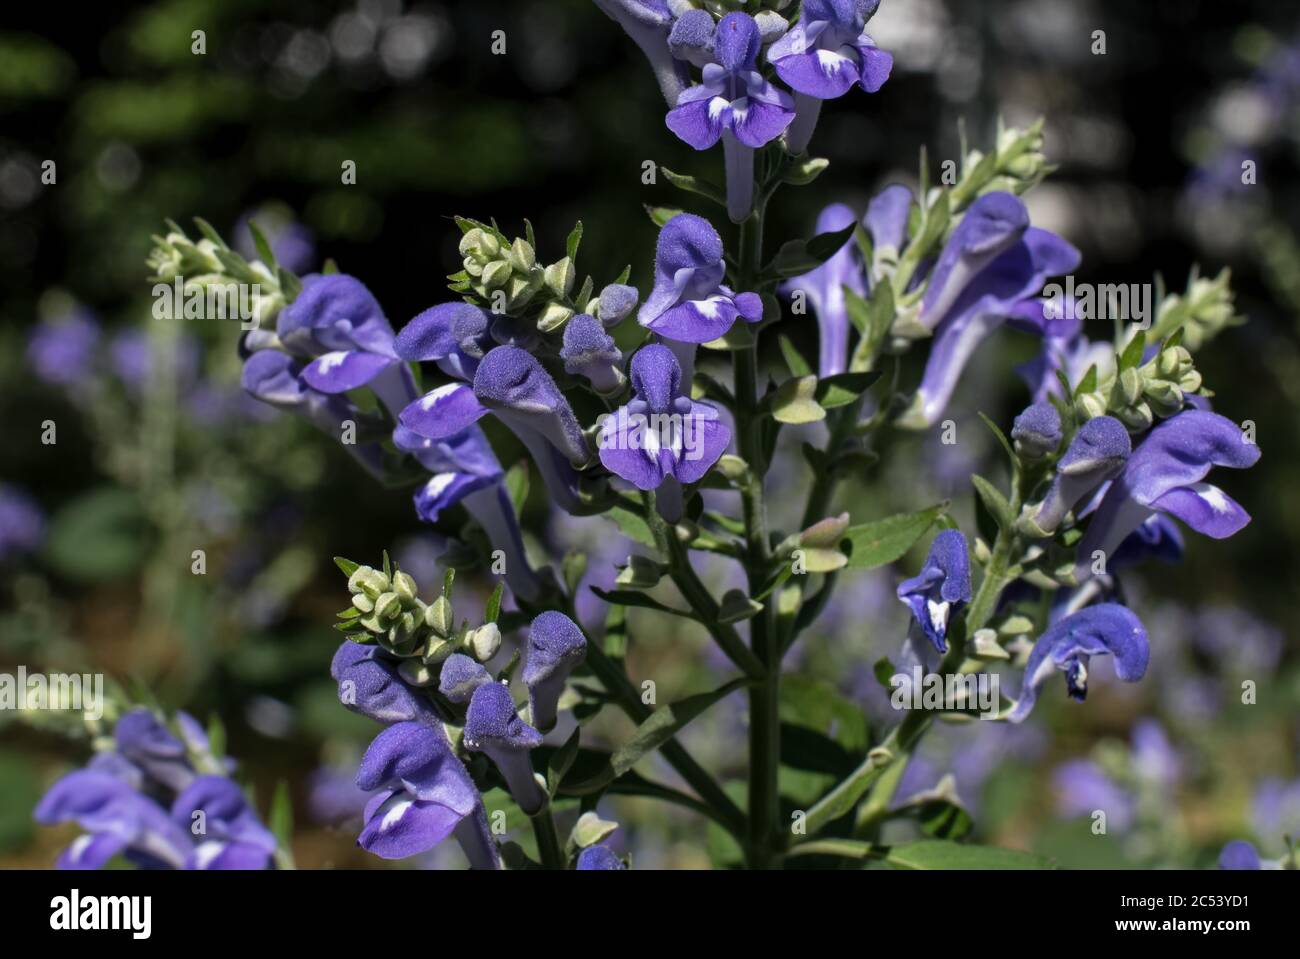 Downy skullcap and sometimes called hoary skullcap is usually found growing in dry soil at edge of the woods, or along roadsides. Stock Photo